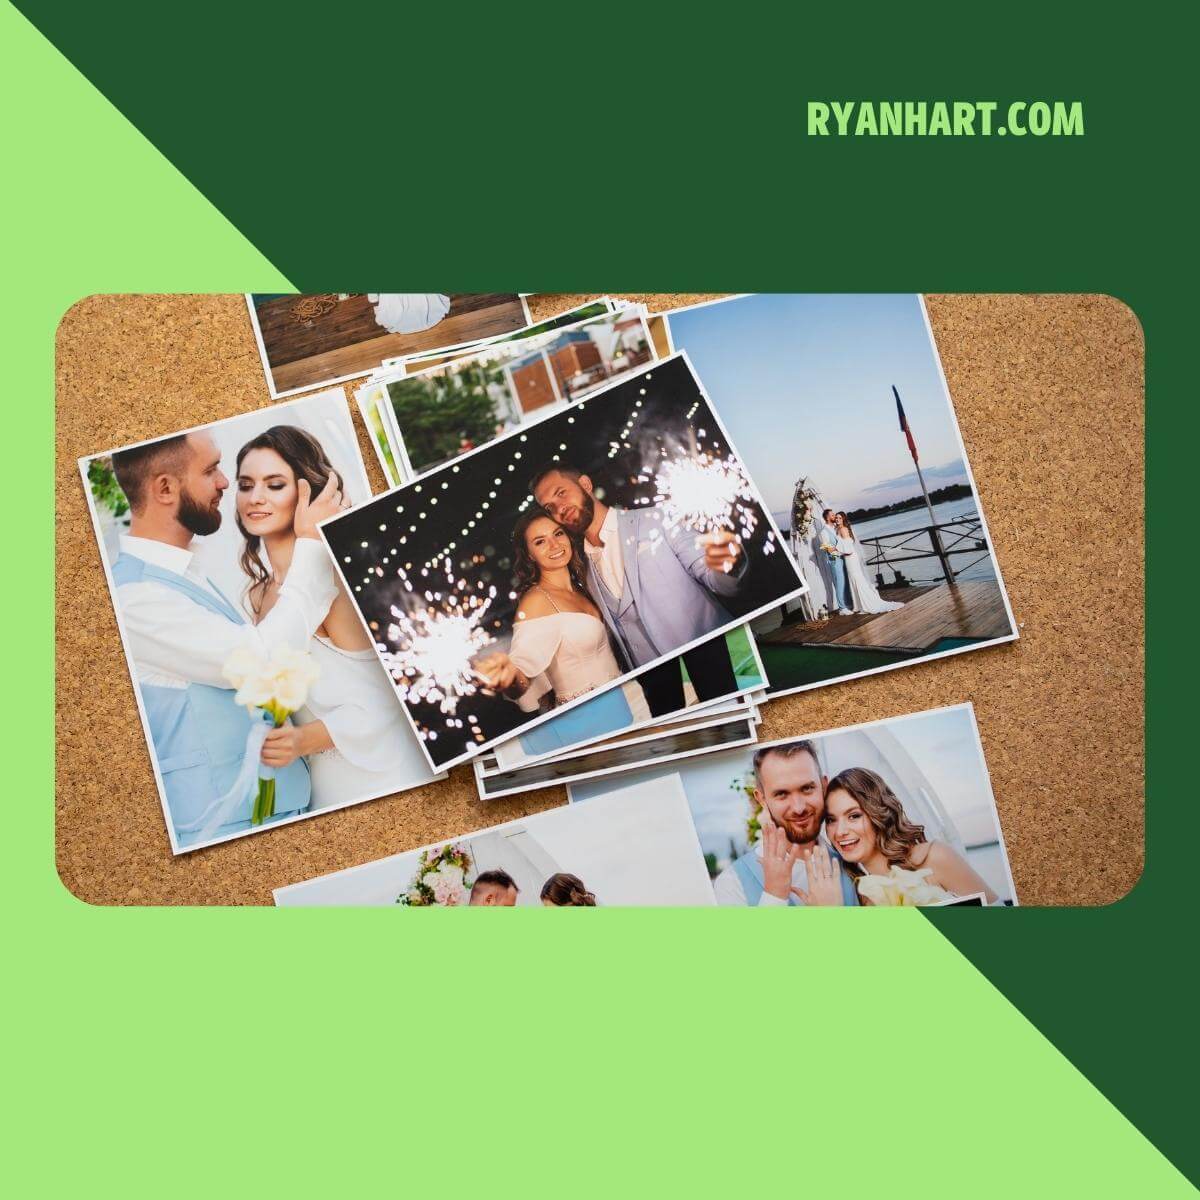 Printed wedding pictures